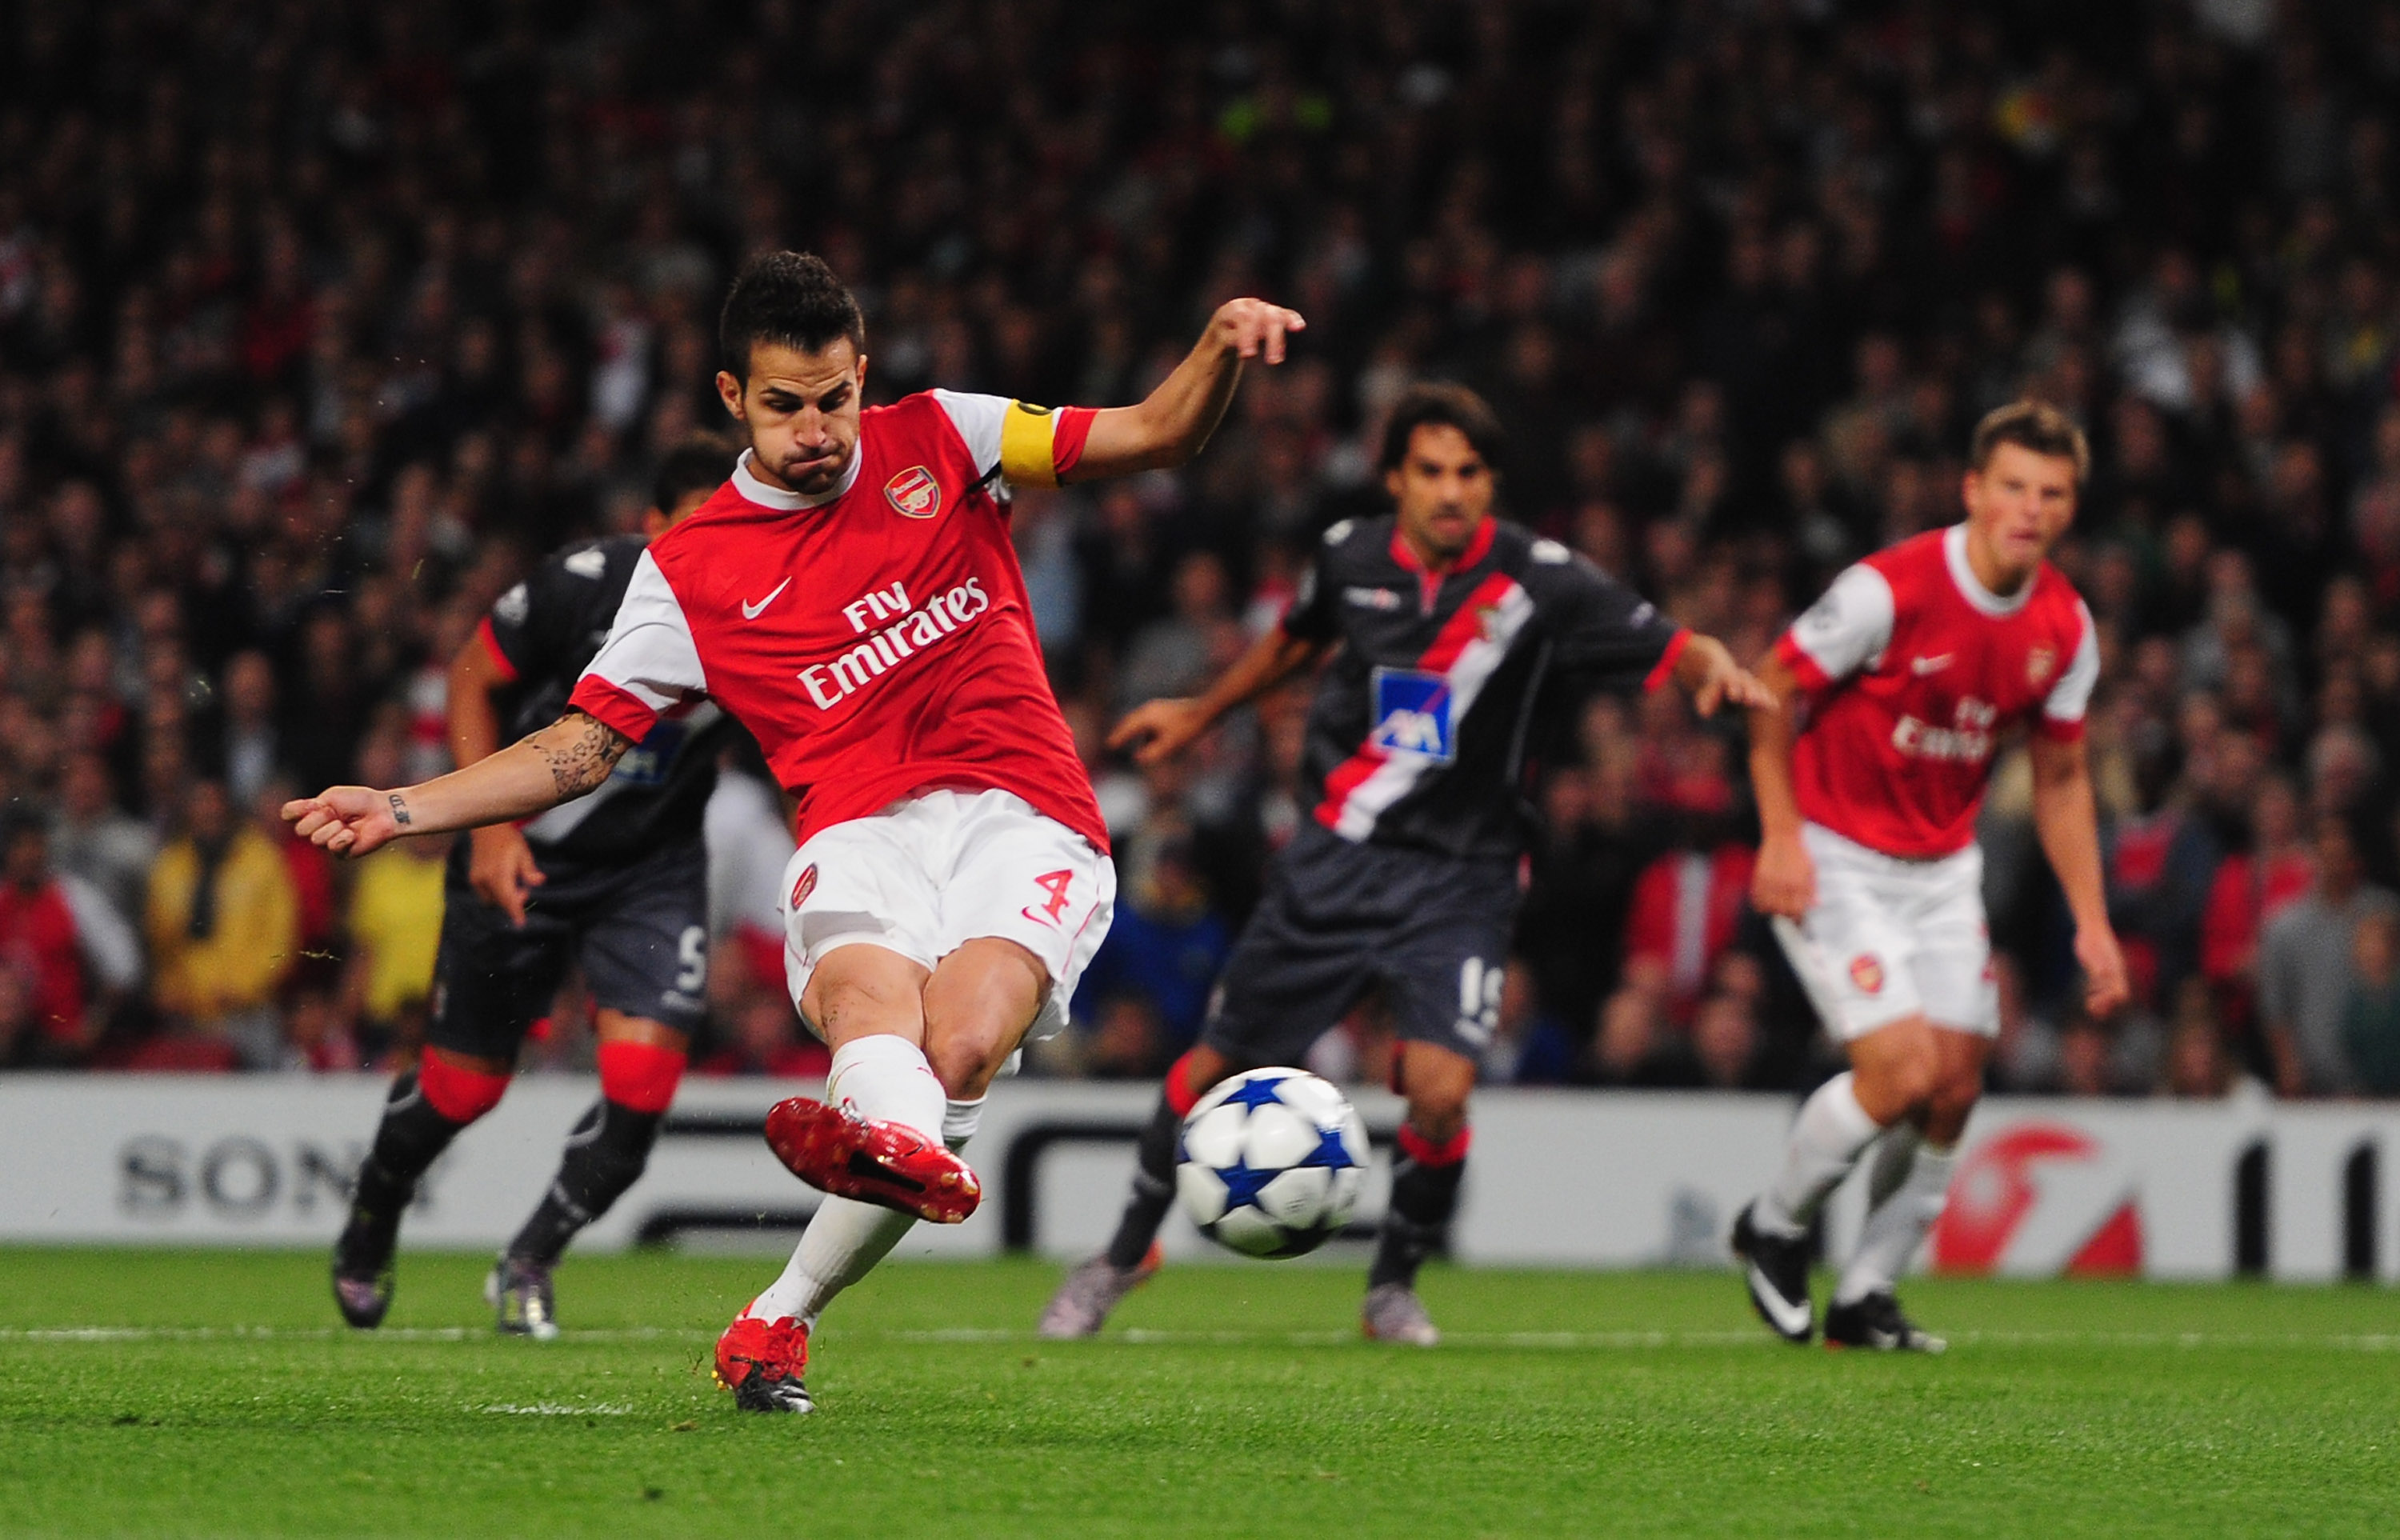 LONDON, ENGLAND - SEPTEMBER 15:  Cesc Fabregas of Arsenal scores from the penalty spot during the UEFA Champions League Group H match between Arsenal and SC Braga at the Emirates Stadium on September 15, 2010 in London, England.  (Photo by Mike Hewitt/Get